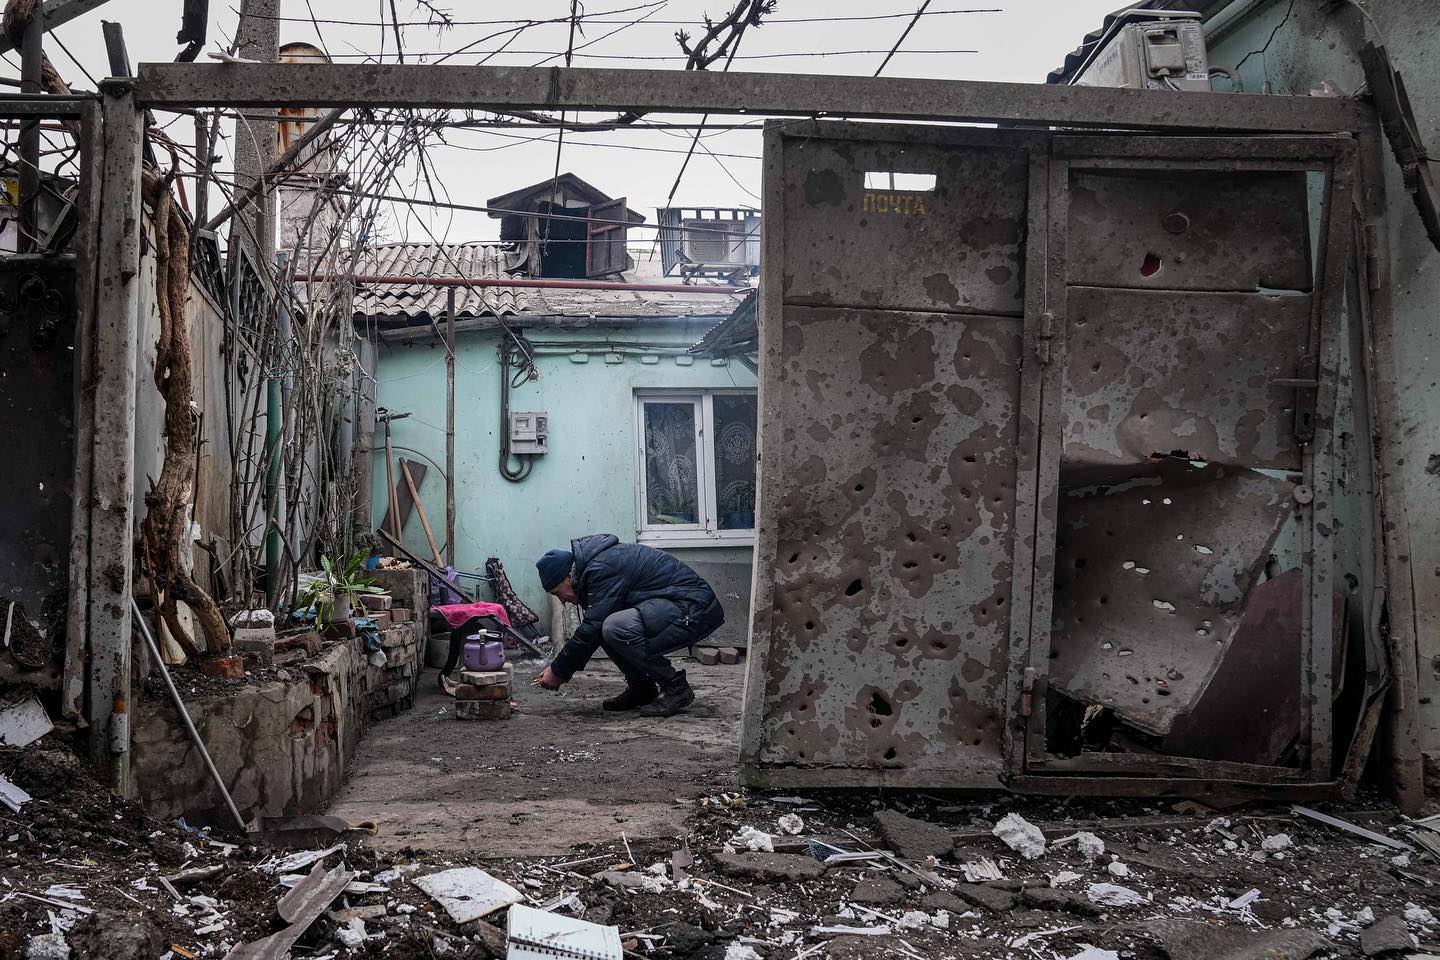 300,000 people trapped in besieged Mariupol face living hell